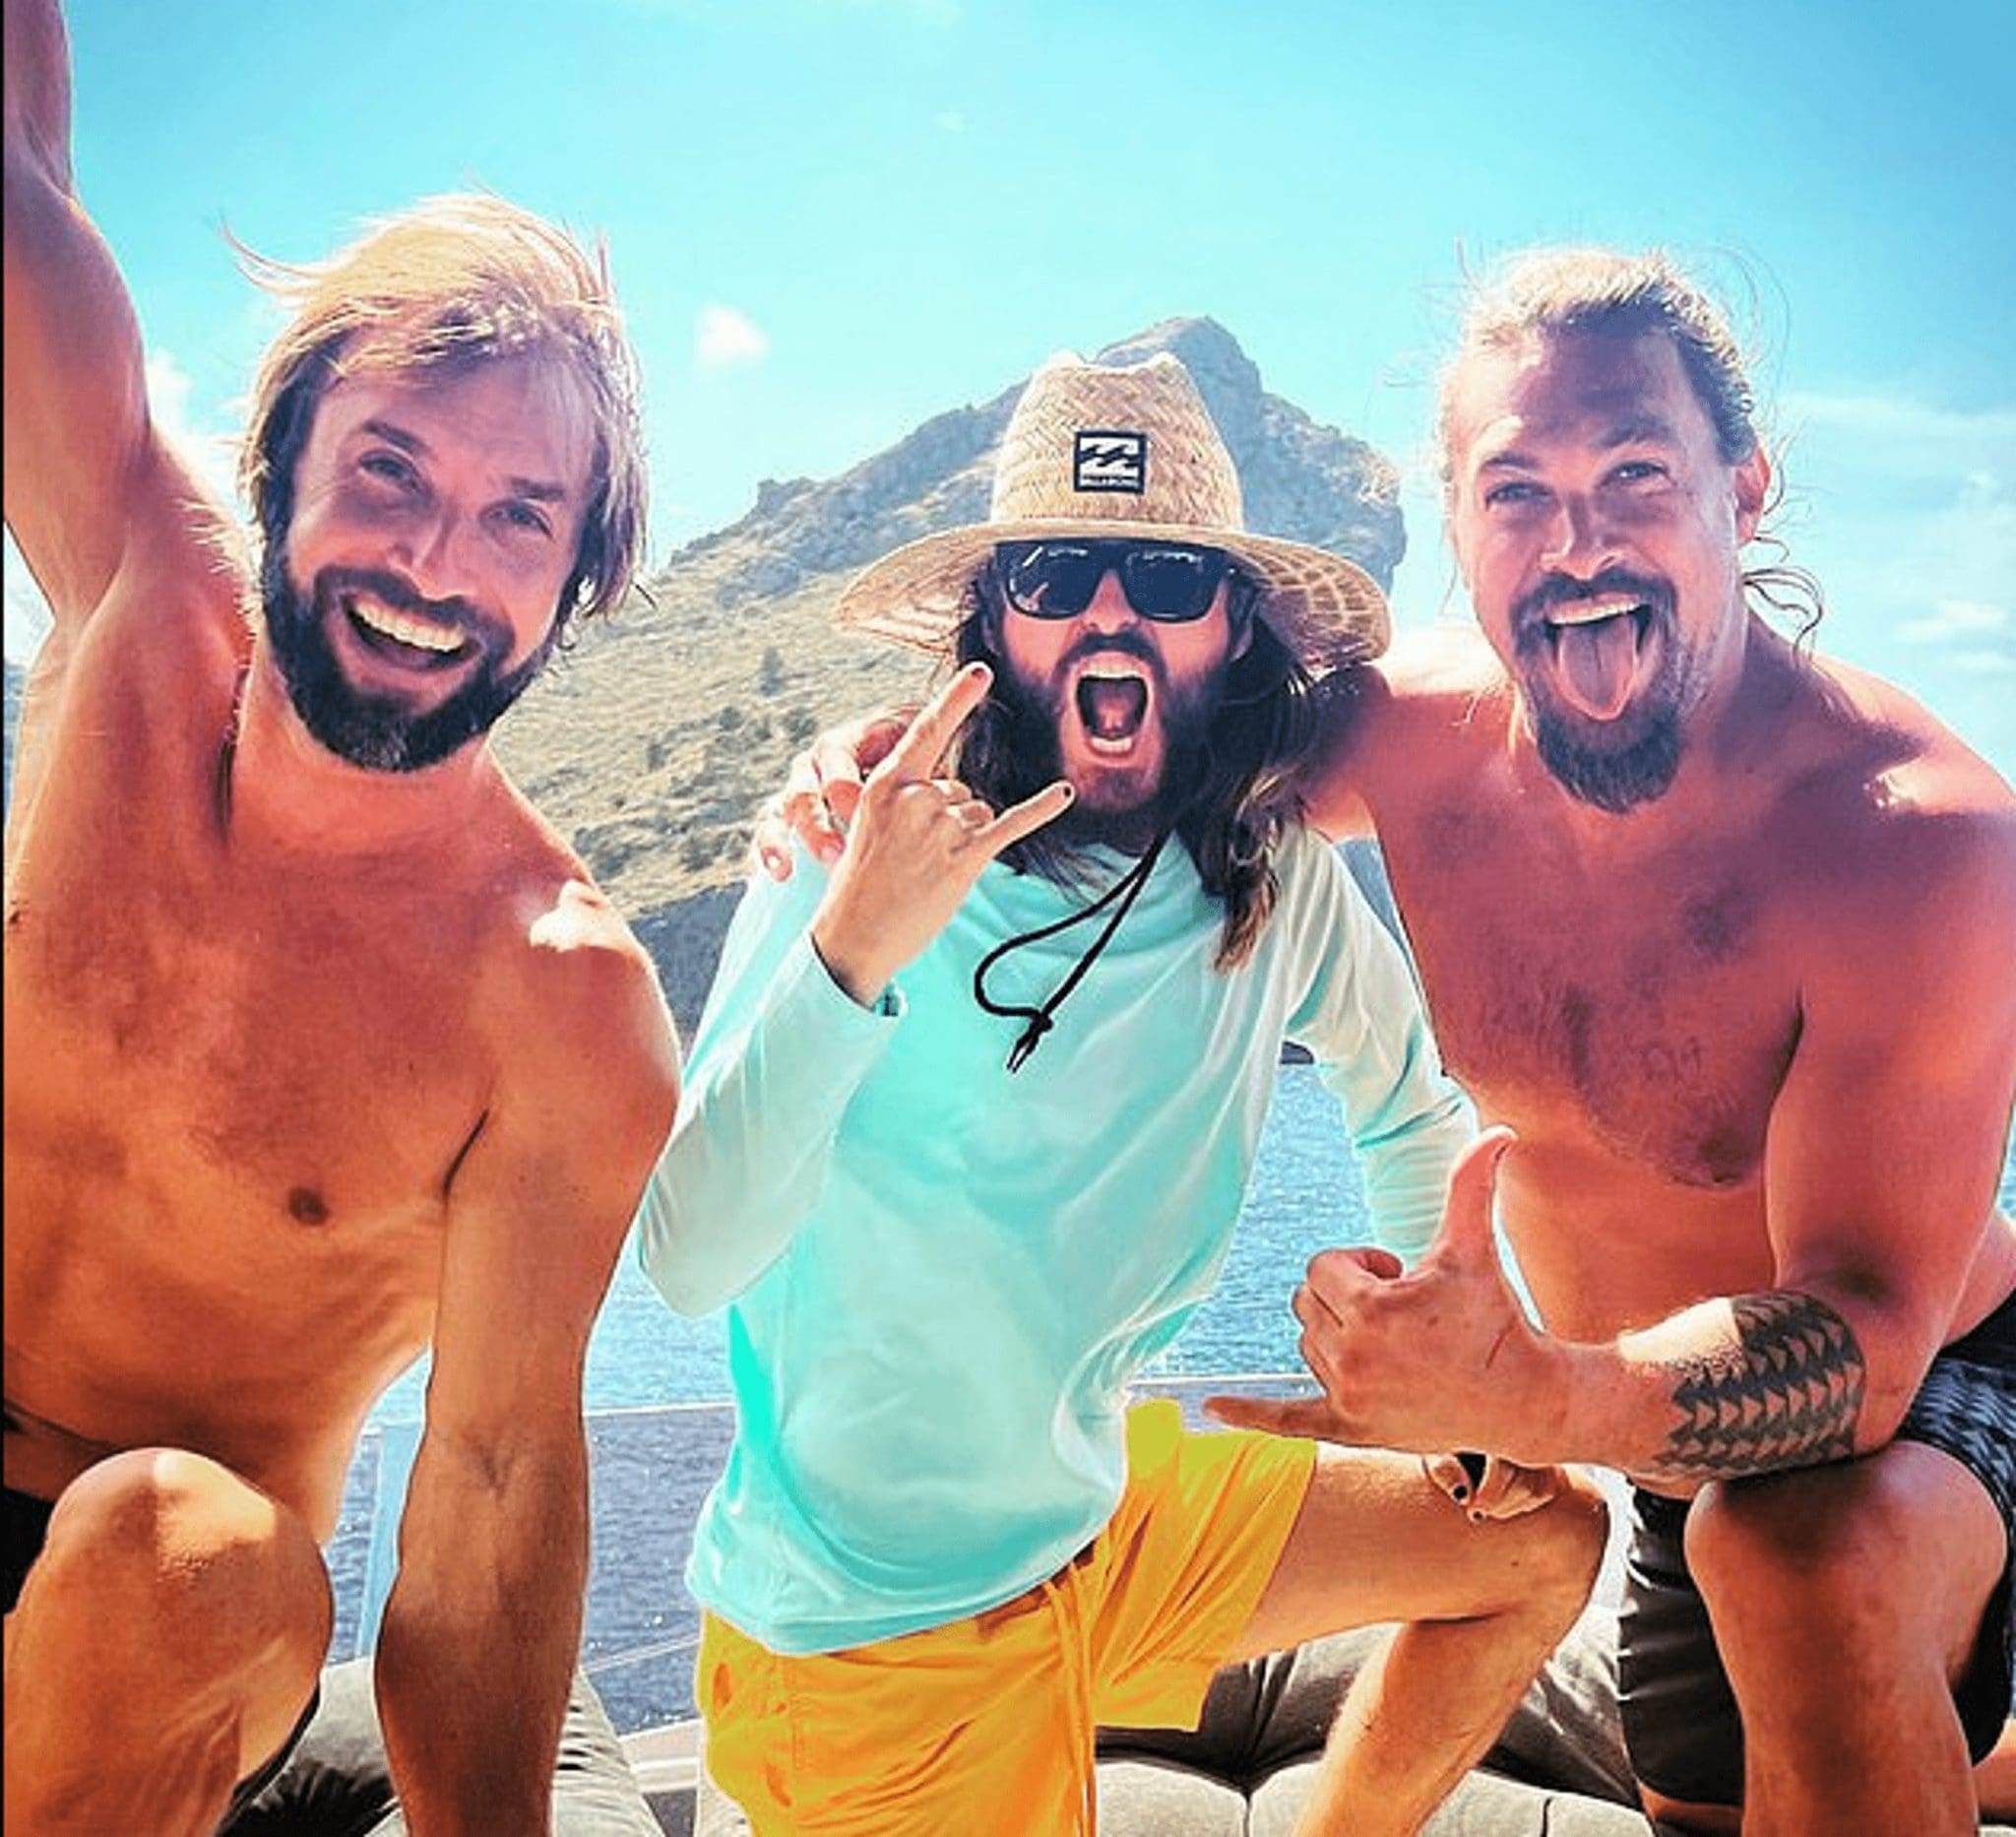 How Jared Leto Spends His Summer: New Love Under The Hot Sun And Funny Selfies With Jason Momoa